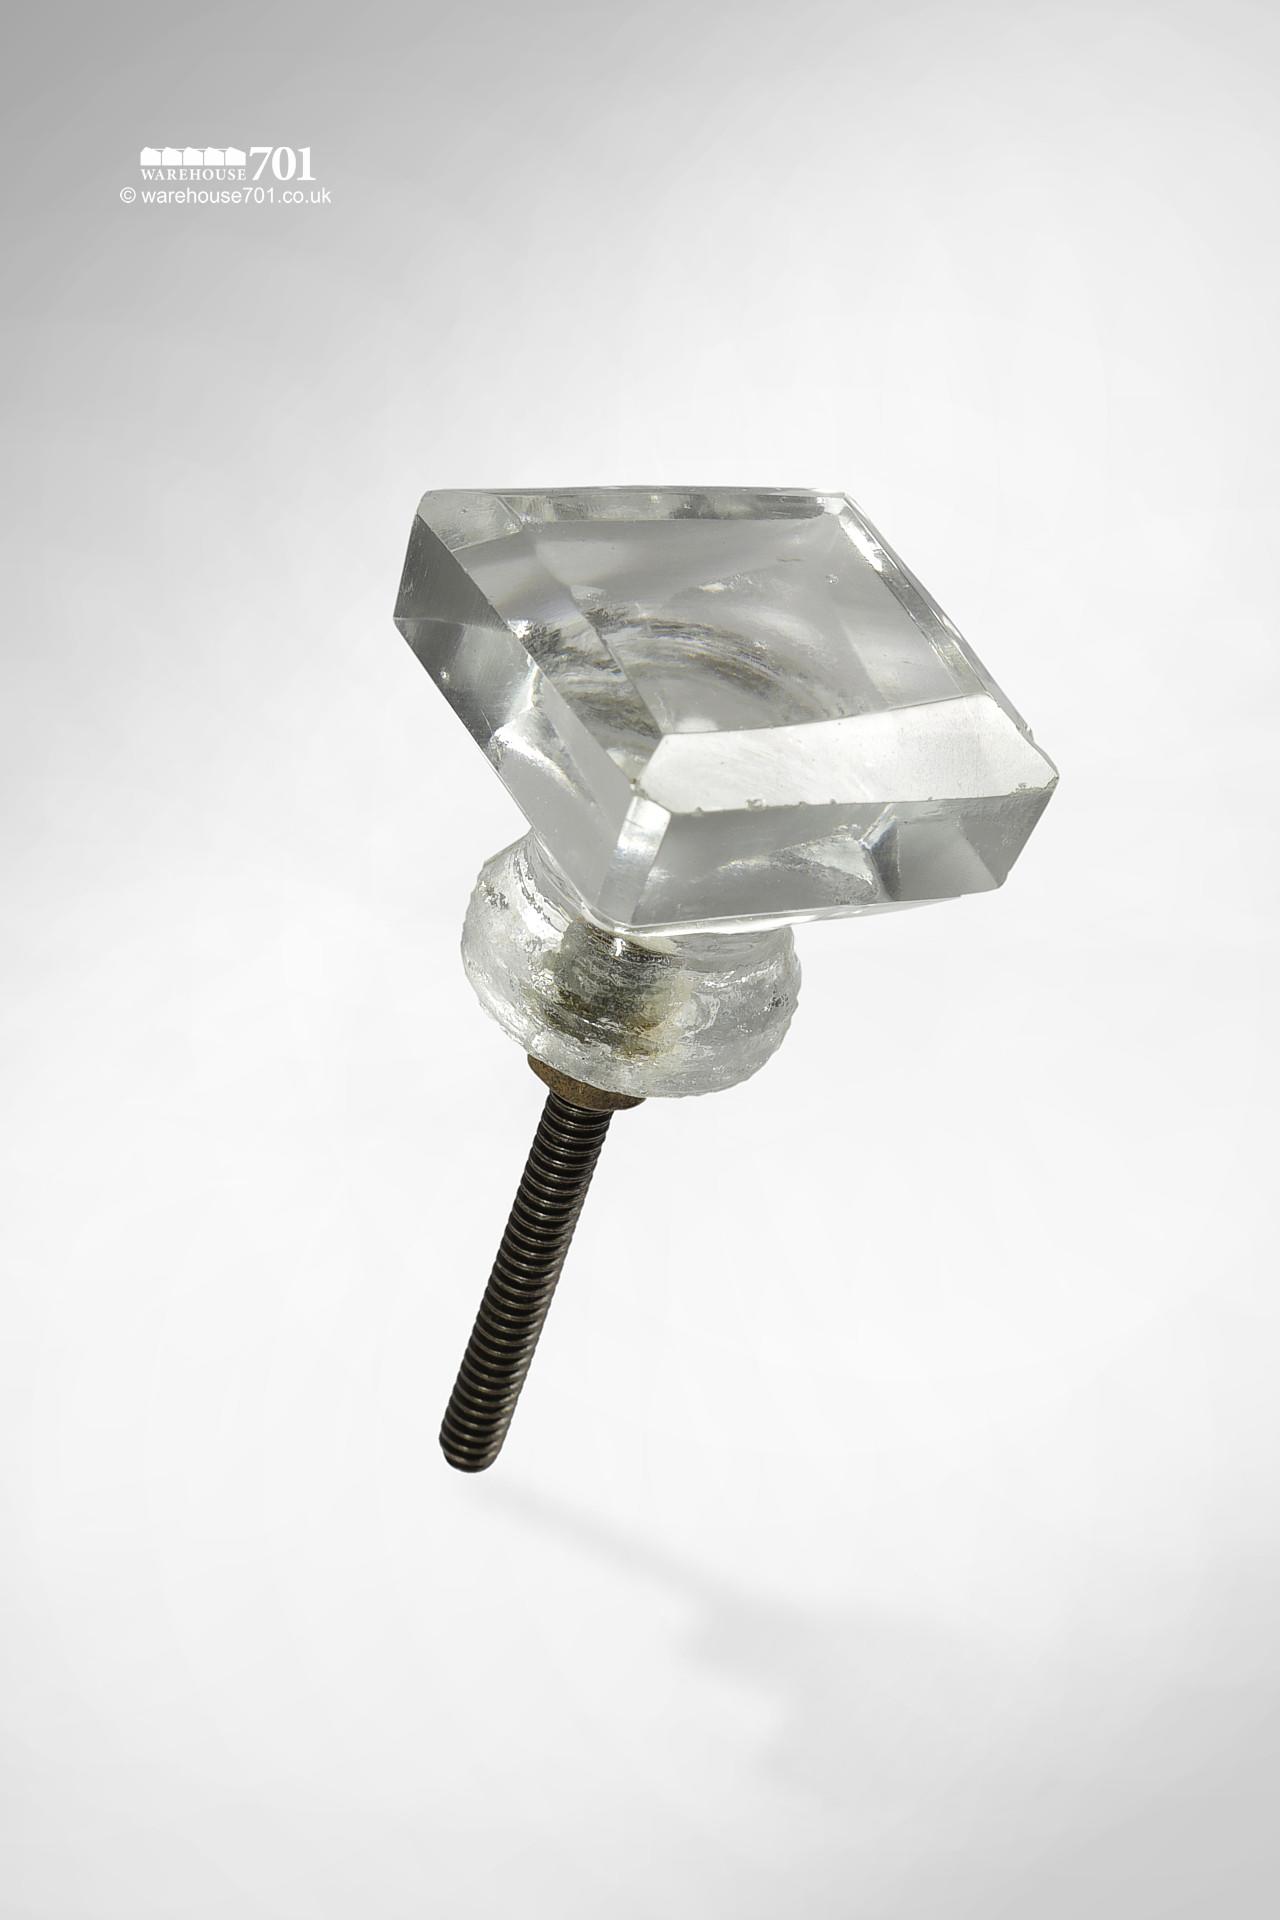 New Square Faceted Glass Door , Drawr or Cupboard Knob